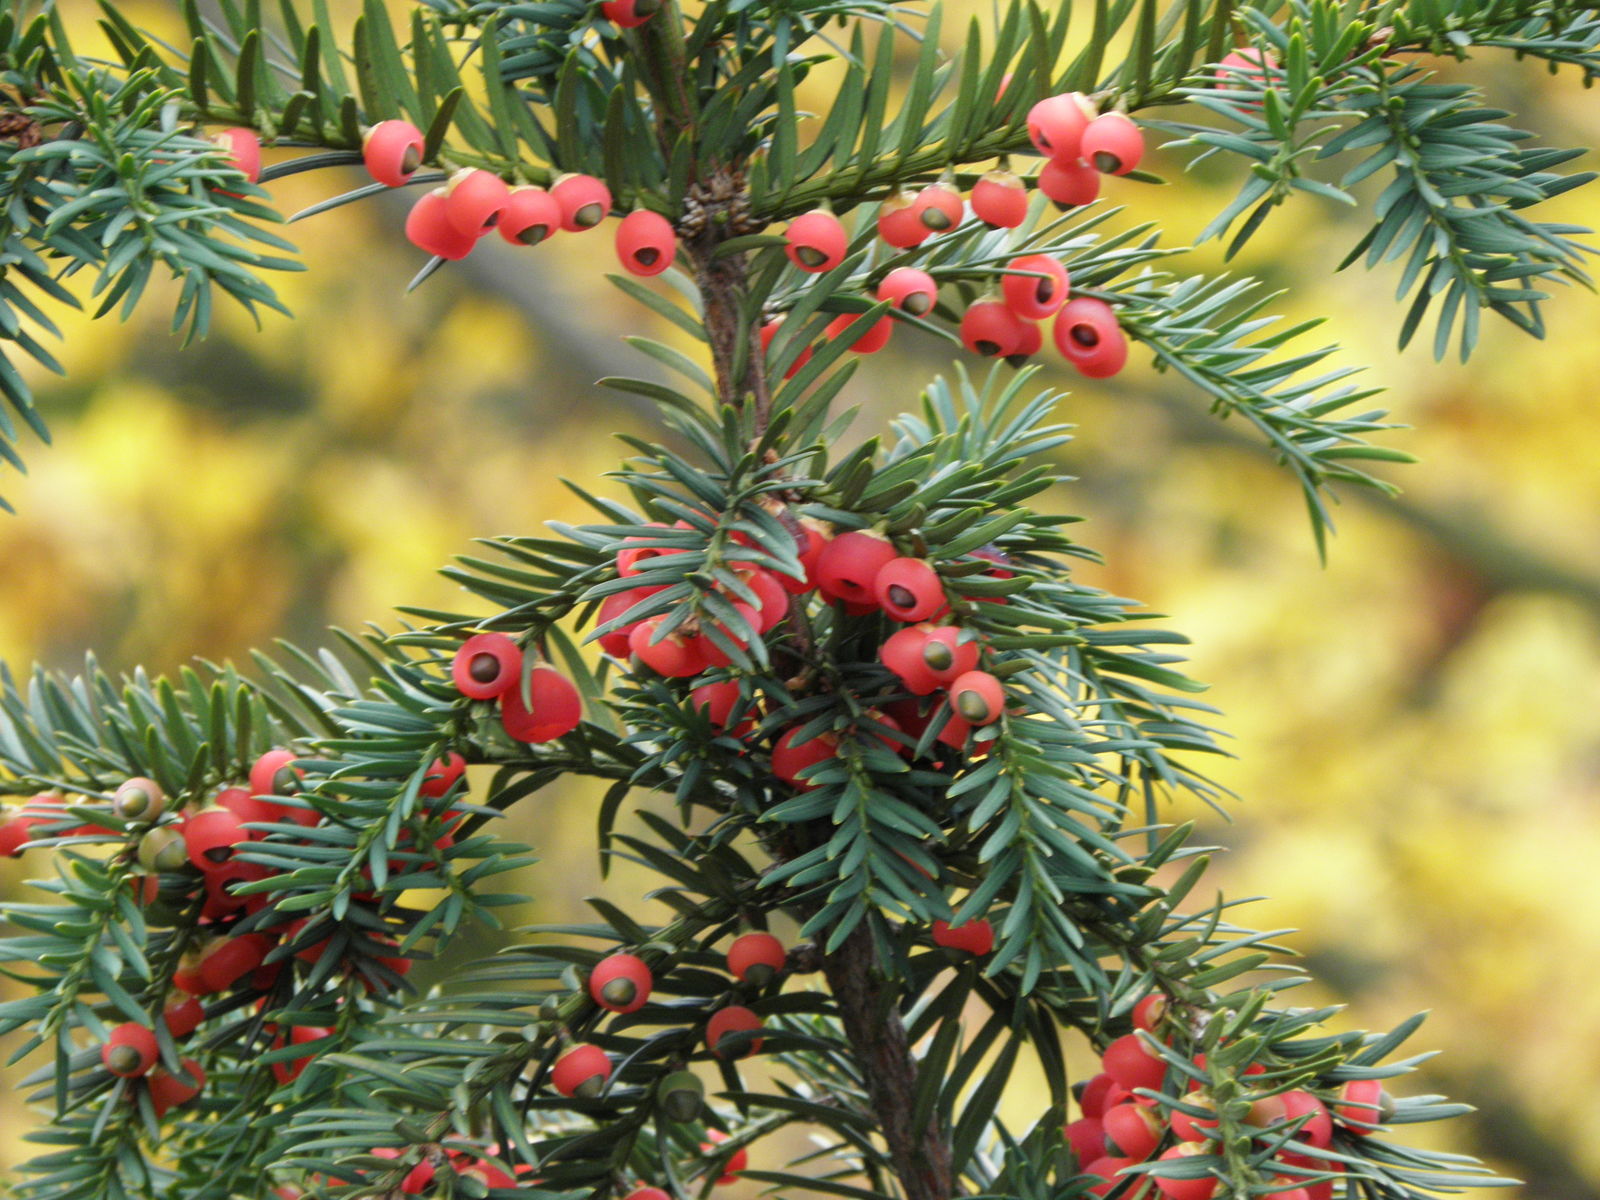 taxus baccata l. | plants of the world online | kew science